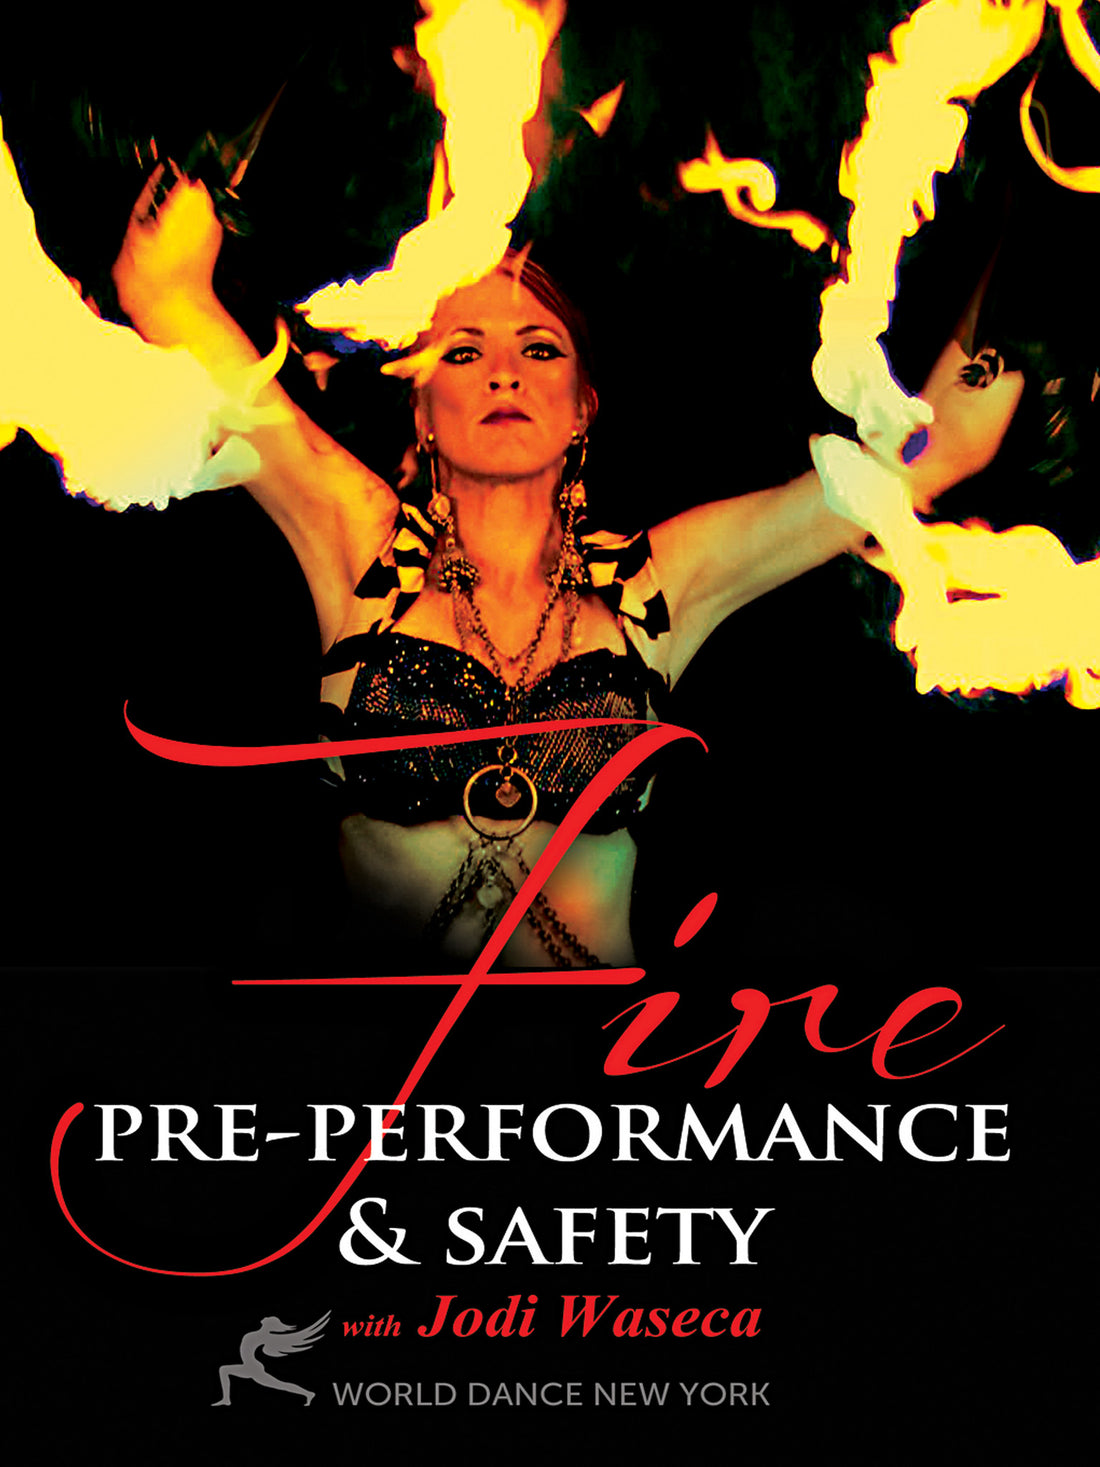 Country, Hoop, and Fire Dance  - classes, mini-courses on instant video / DVD